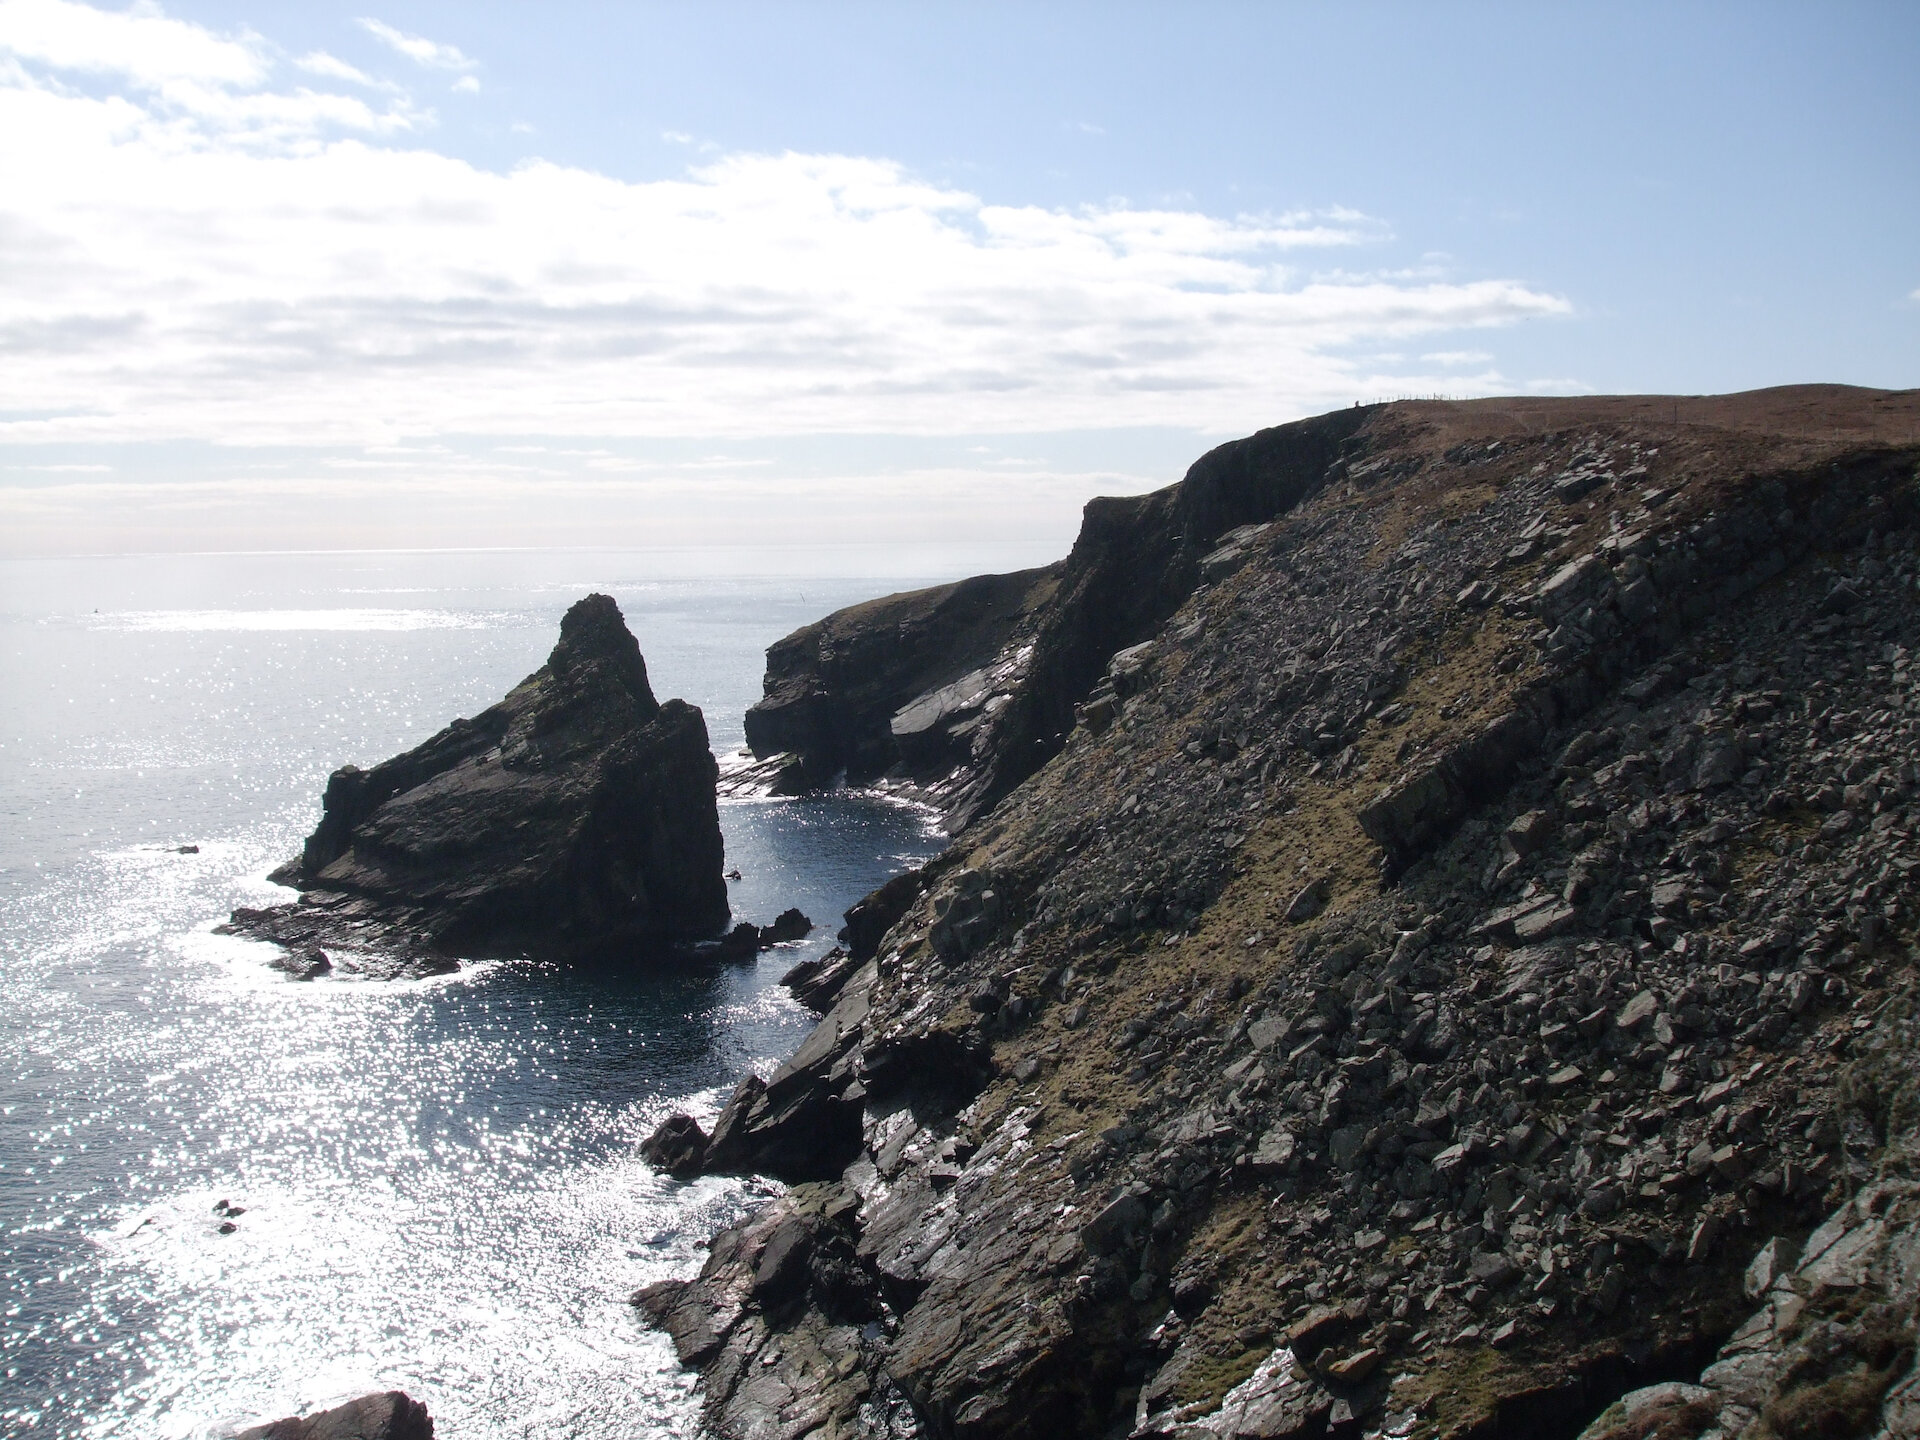 Stoura Clett, Bressay, an impressive natural stack between the Bard headland and island of Noss.